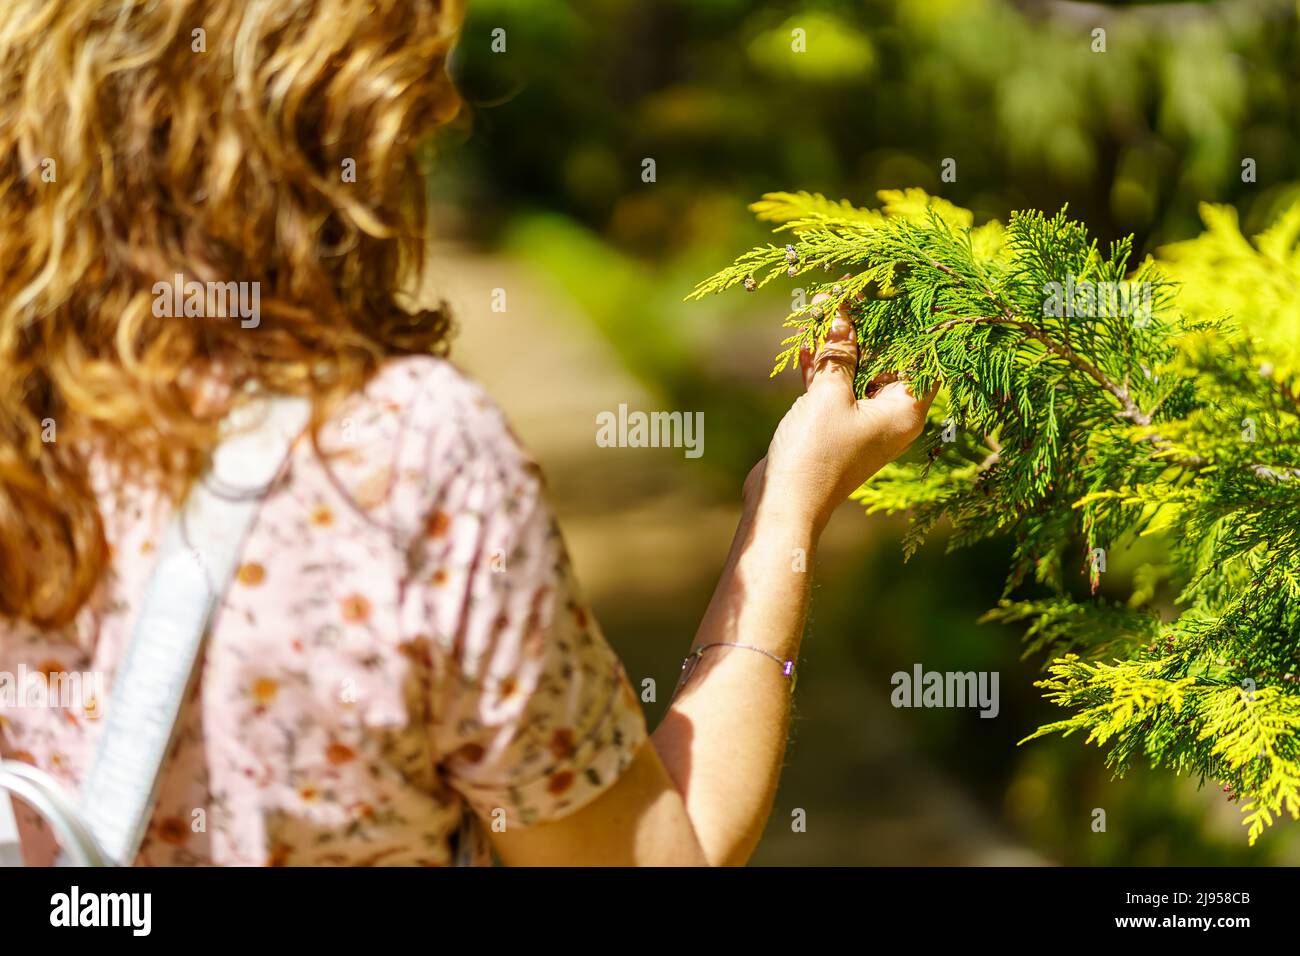 Woman taking a plant with her hand and observing its beauty. Stock Photo